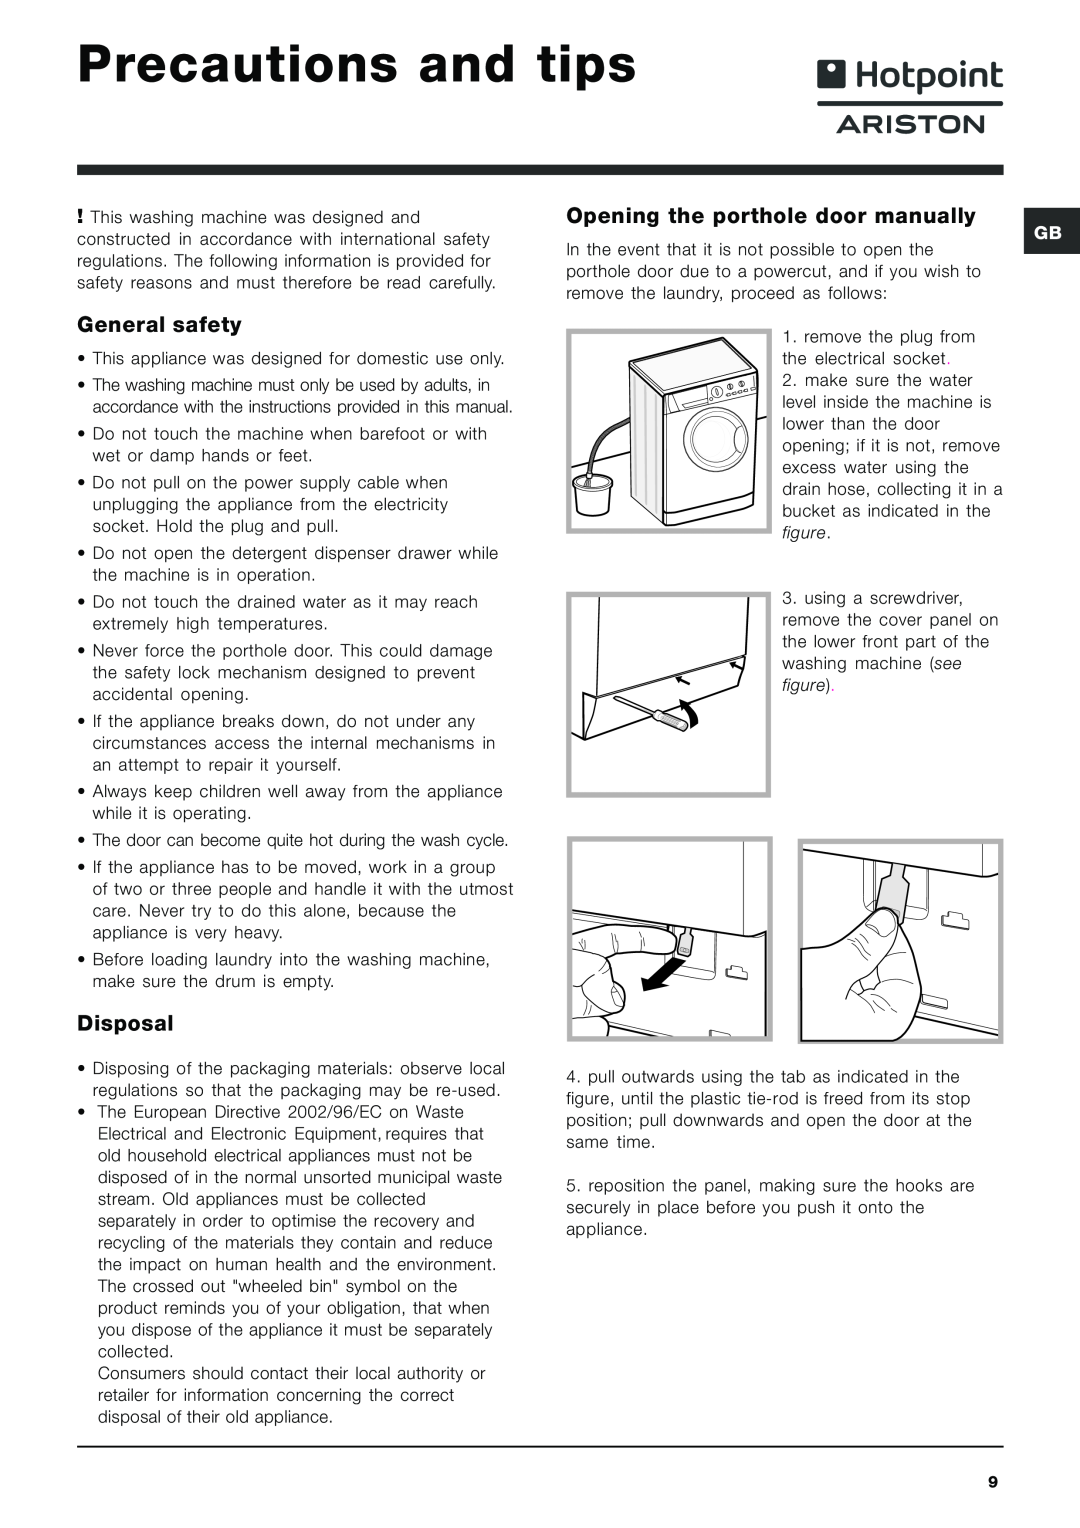 Hotpoint ARXXL105 Precautions and tips, General safety, Disposal, Opening the porthole door manually 